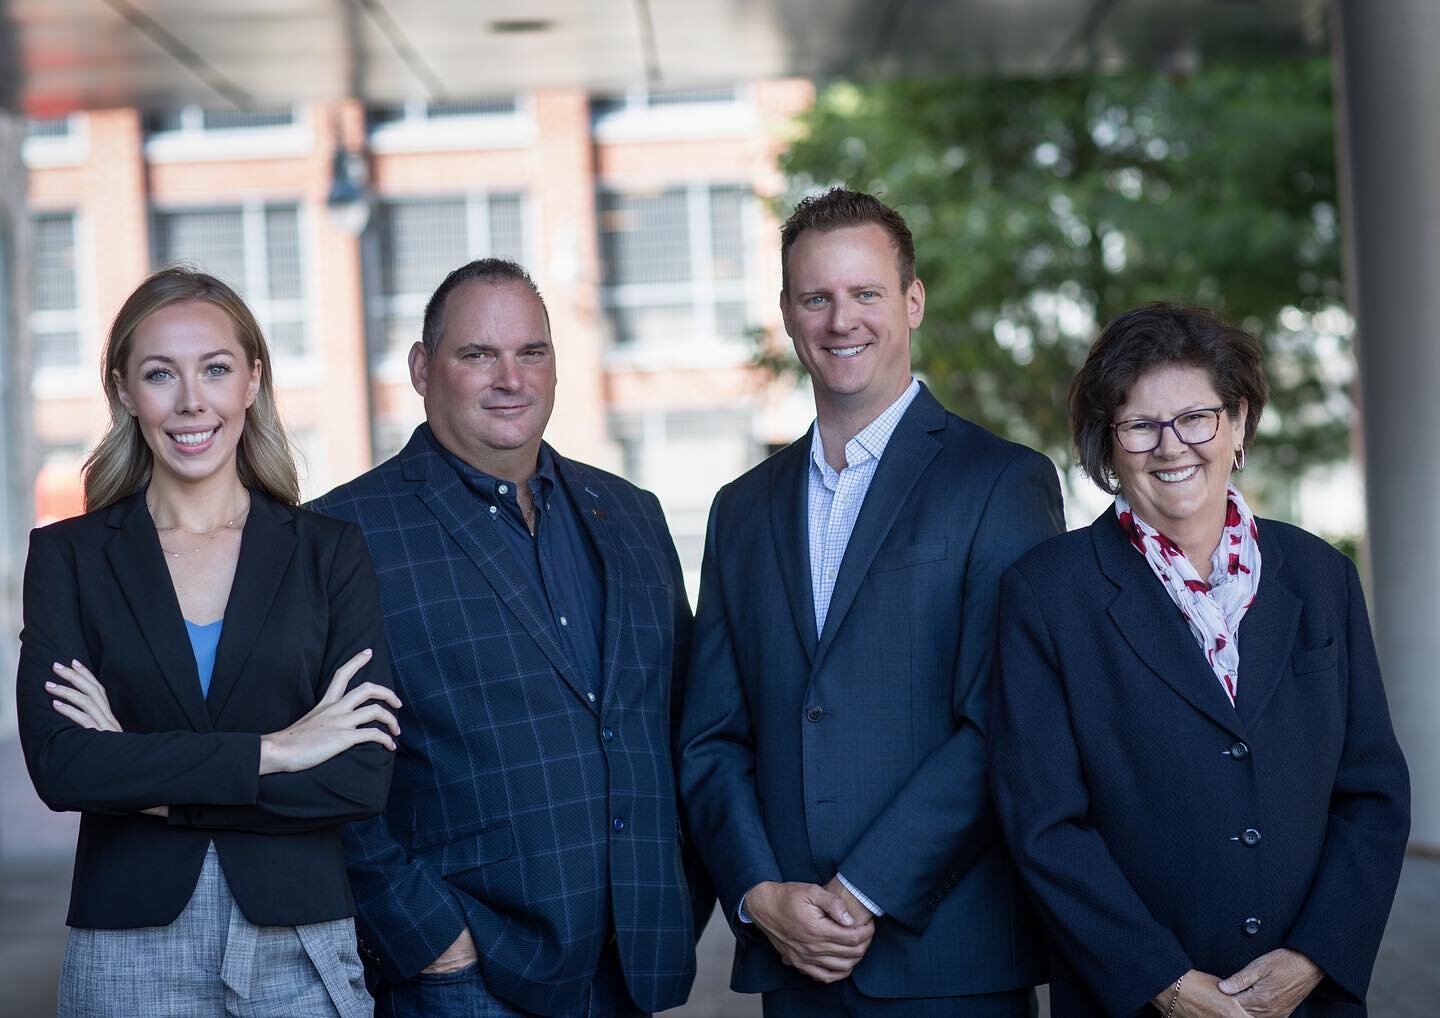 TEAM SHODY REAL ESTATE🙌🏻
.
.
.
#guelphheadshotphotographer #mccormickphotography #guelphphotographer #guelphrealestate #realestateagent #realestate #realtybrokerage #guelphpeople #downtownguelph #dreamteam #teamphoto #lifestyleheadshots #lifestyleh